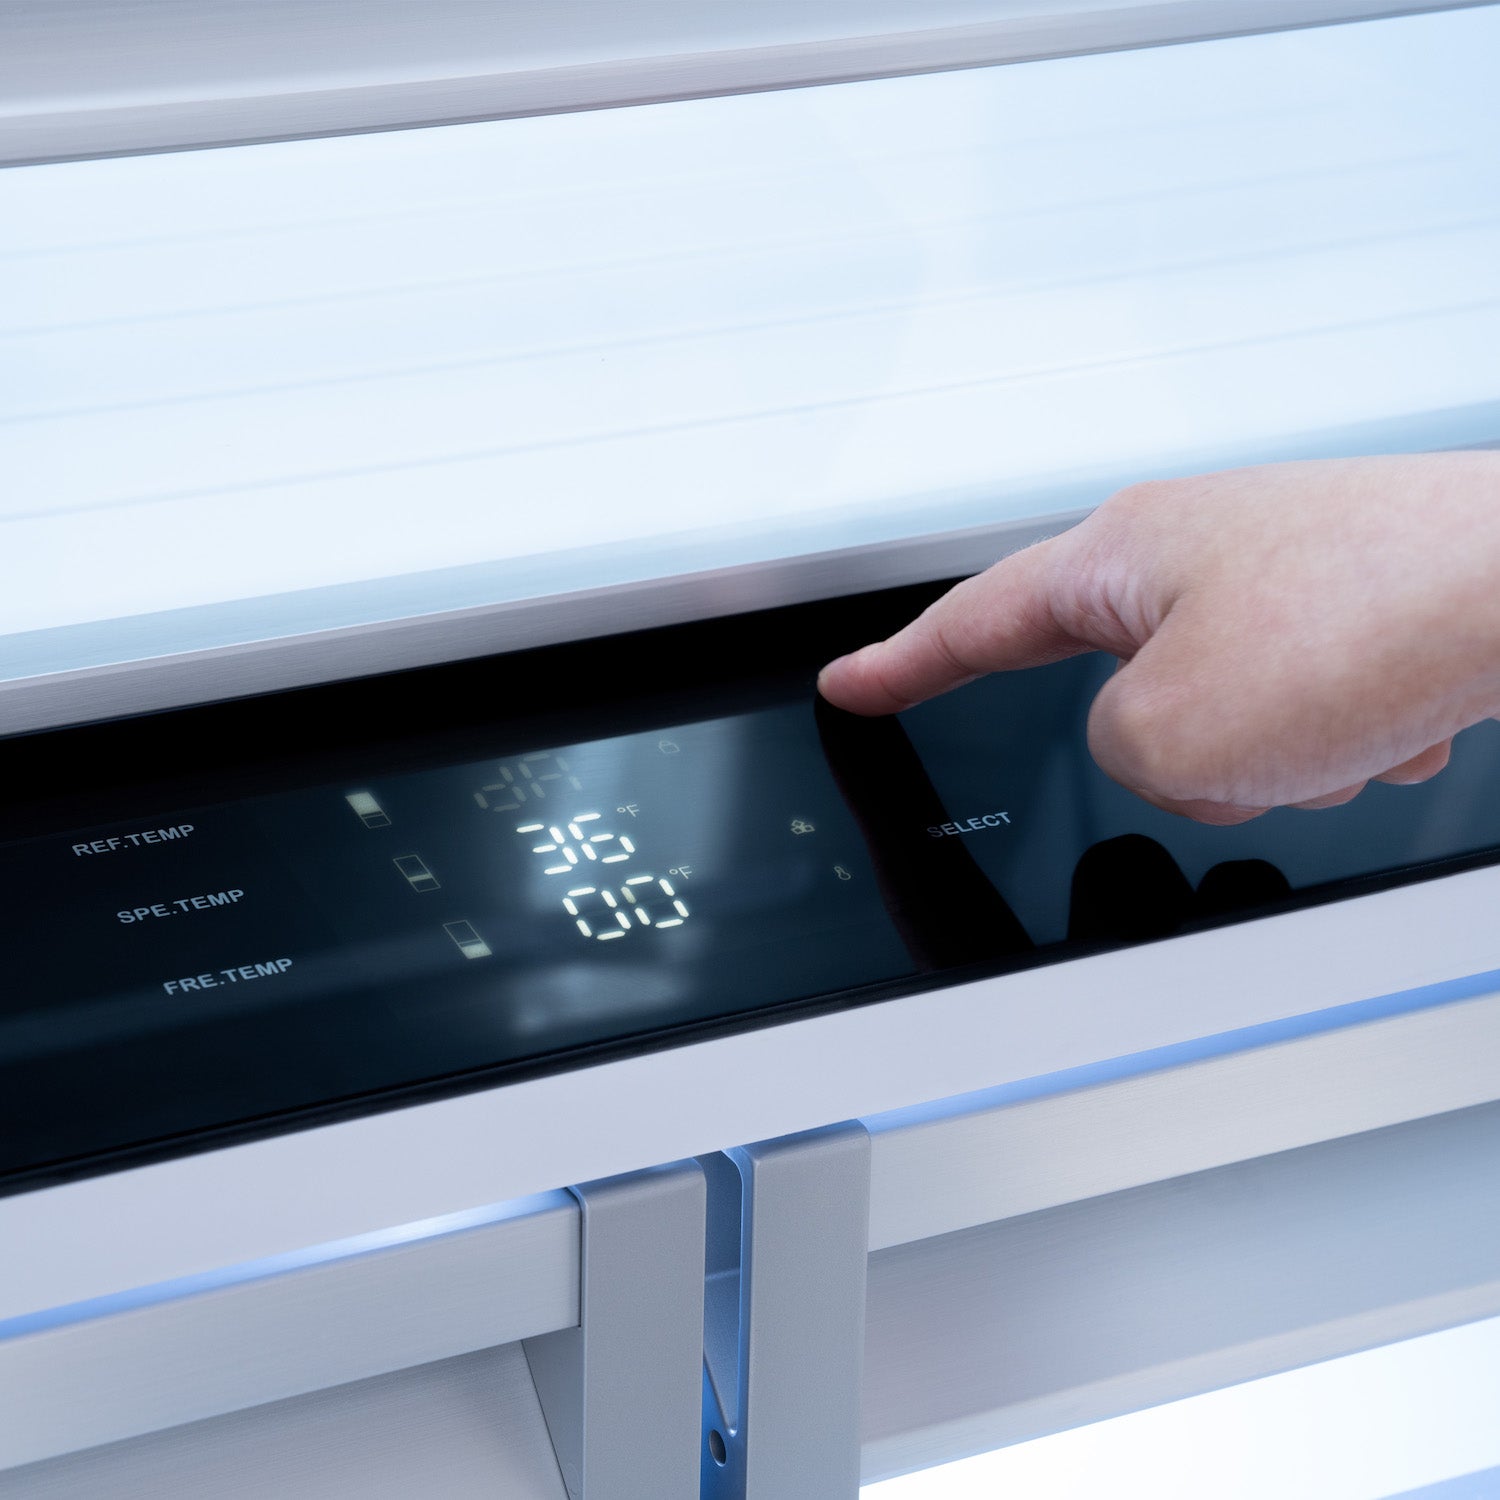 Using the touch LED display and control inside ZLINE built-in refrigerator.